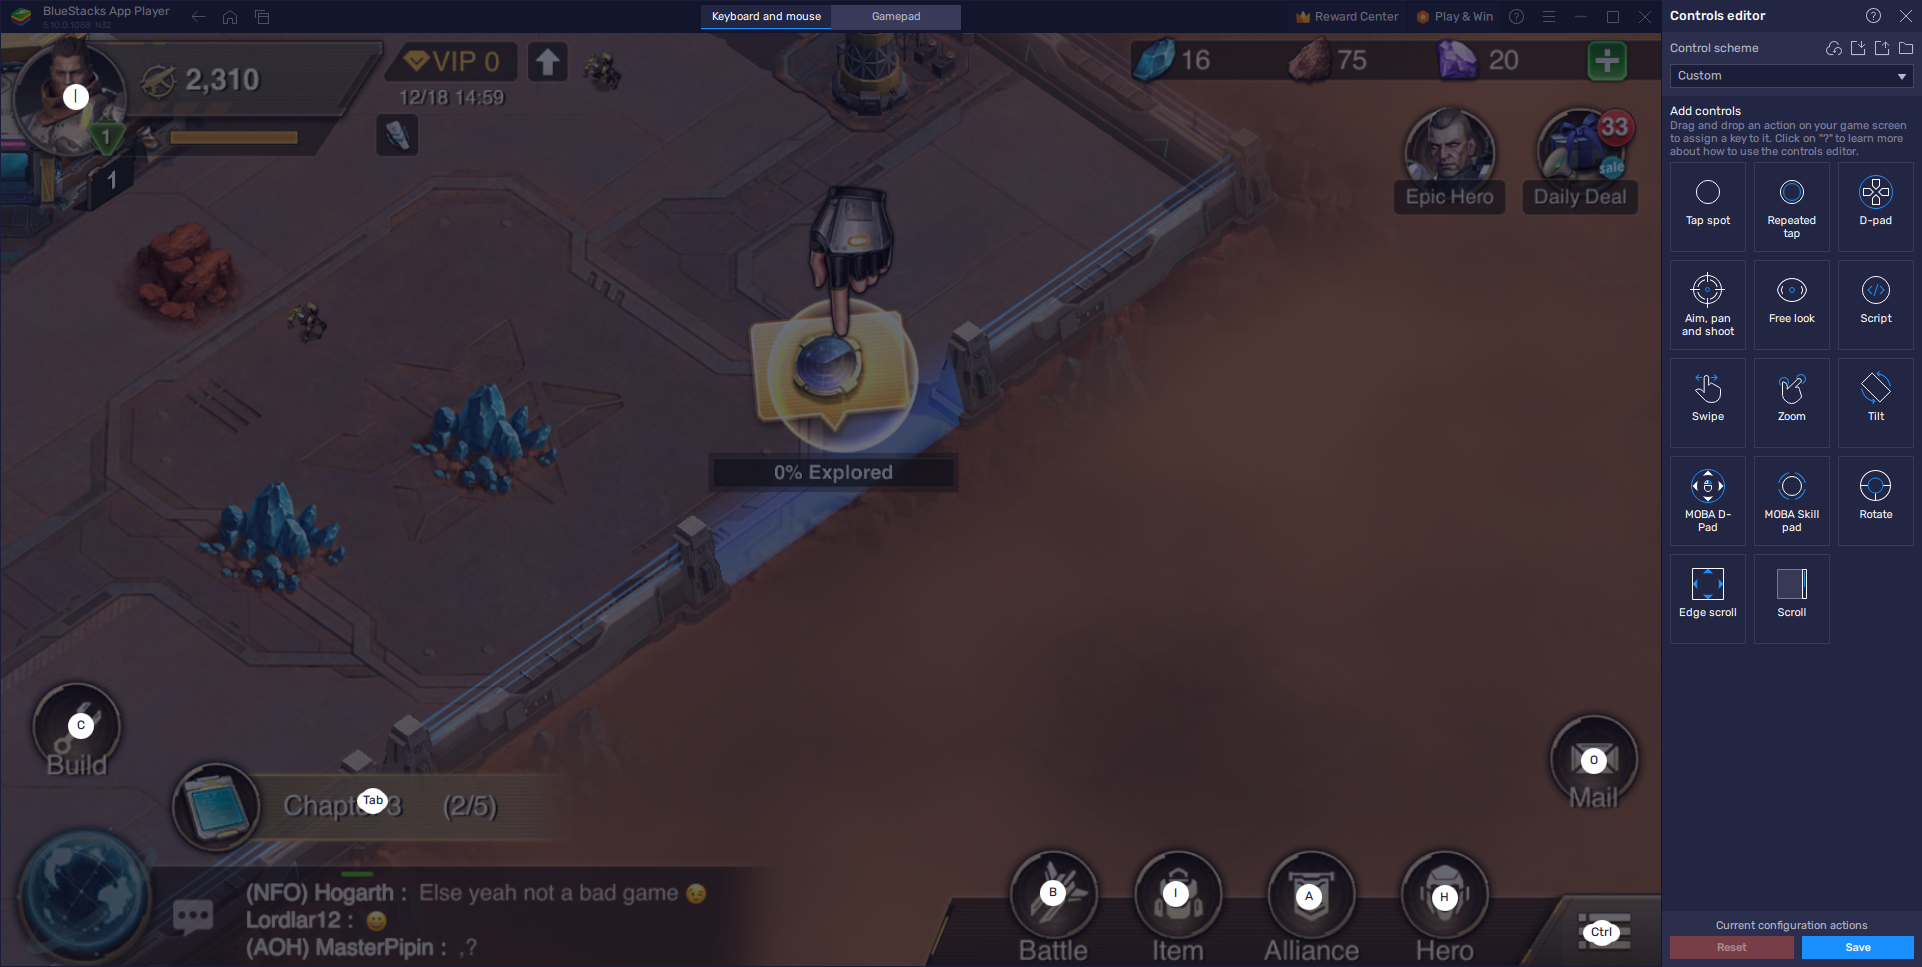 Marsaction: Infinite Ambition on PC - How to Use BlueStacks to Significantly Improve Your Base Building and Development